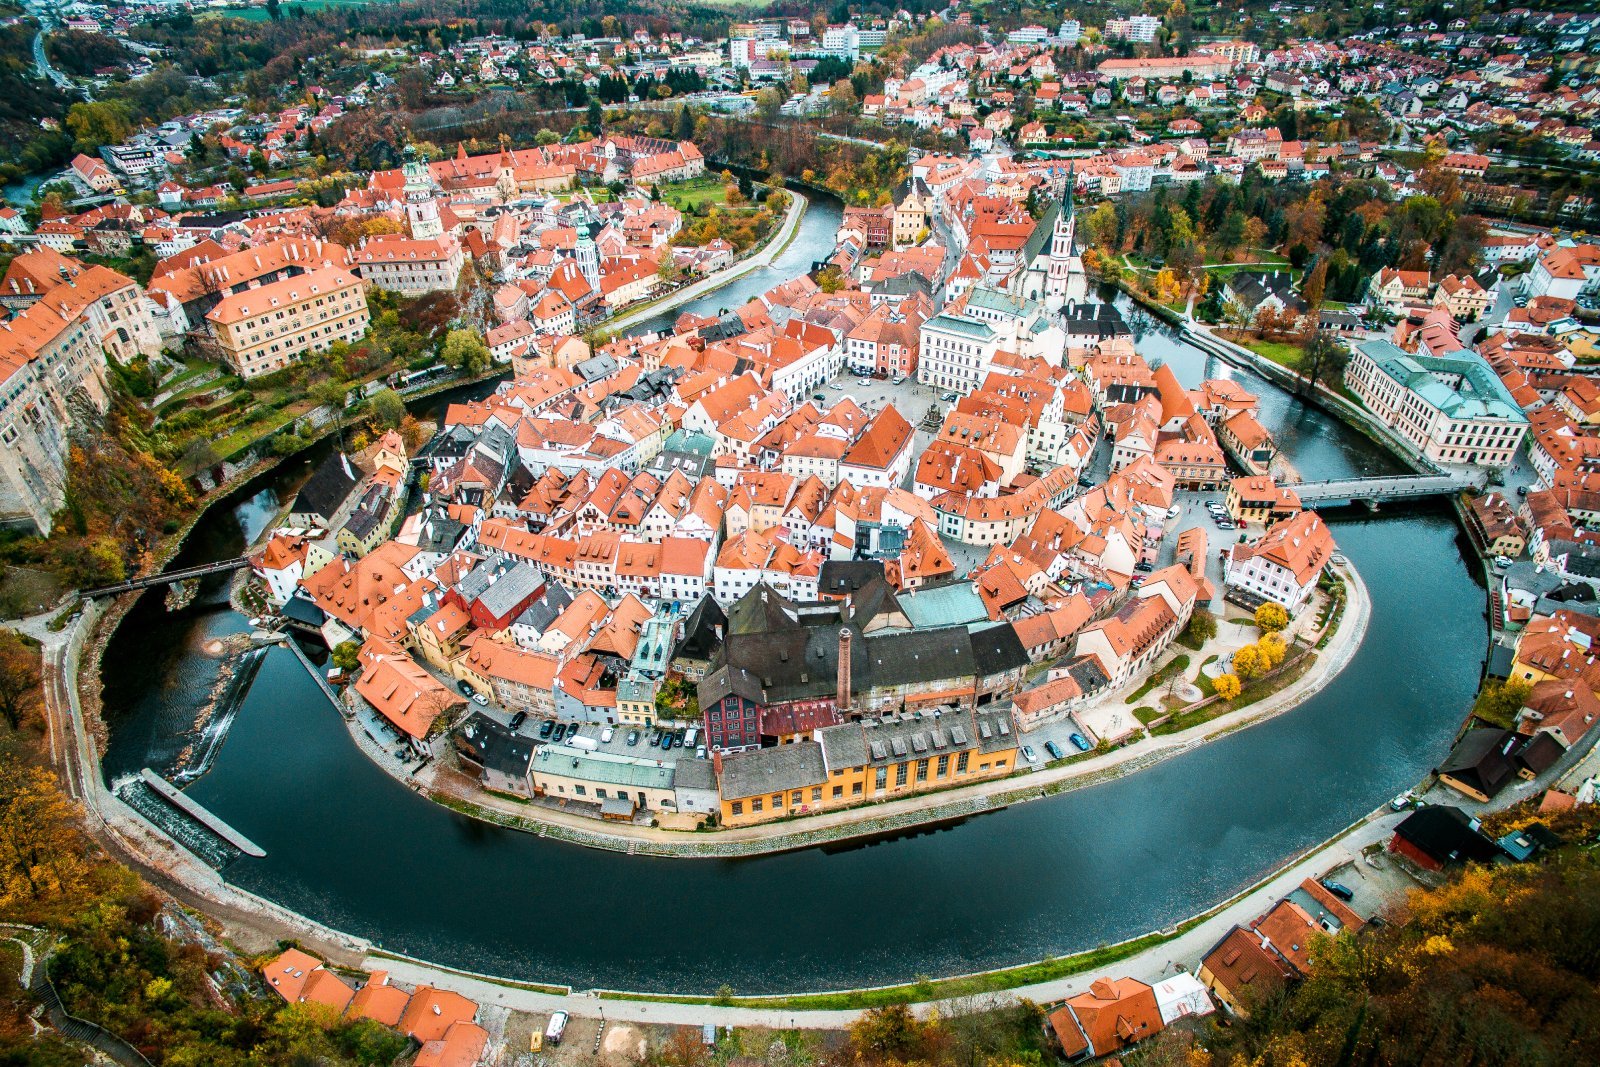 <p class="wp-caption-text">Image Credit: Shutterstock / Nataliia Budianska</p>  <p>This fairy-tale town offers a captivating experience with its well-preserved medieval architecture and reasonable prices for food and accommodations.</p>